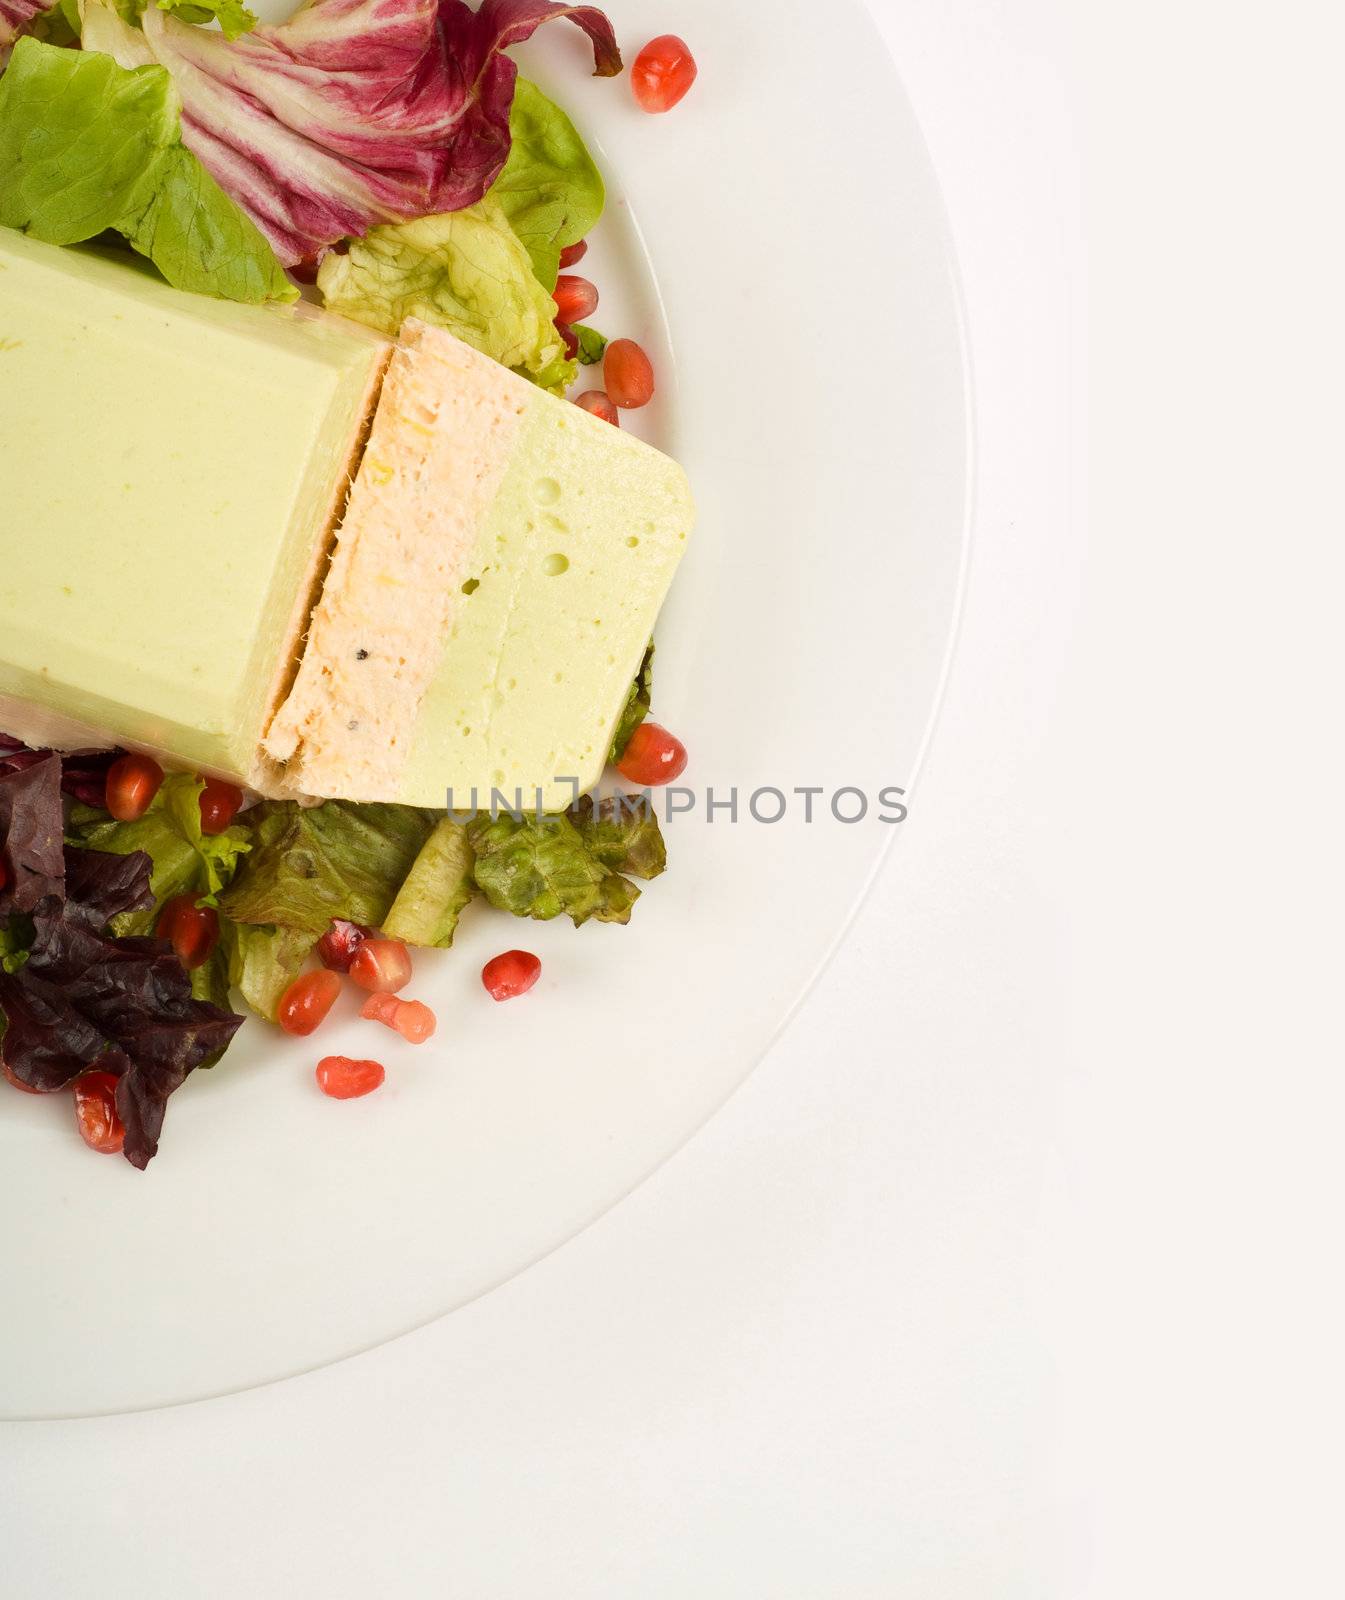 Salmon and avocado terrine on white plate with salad